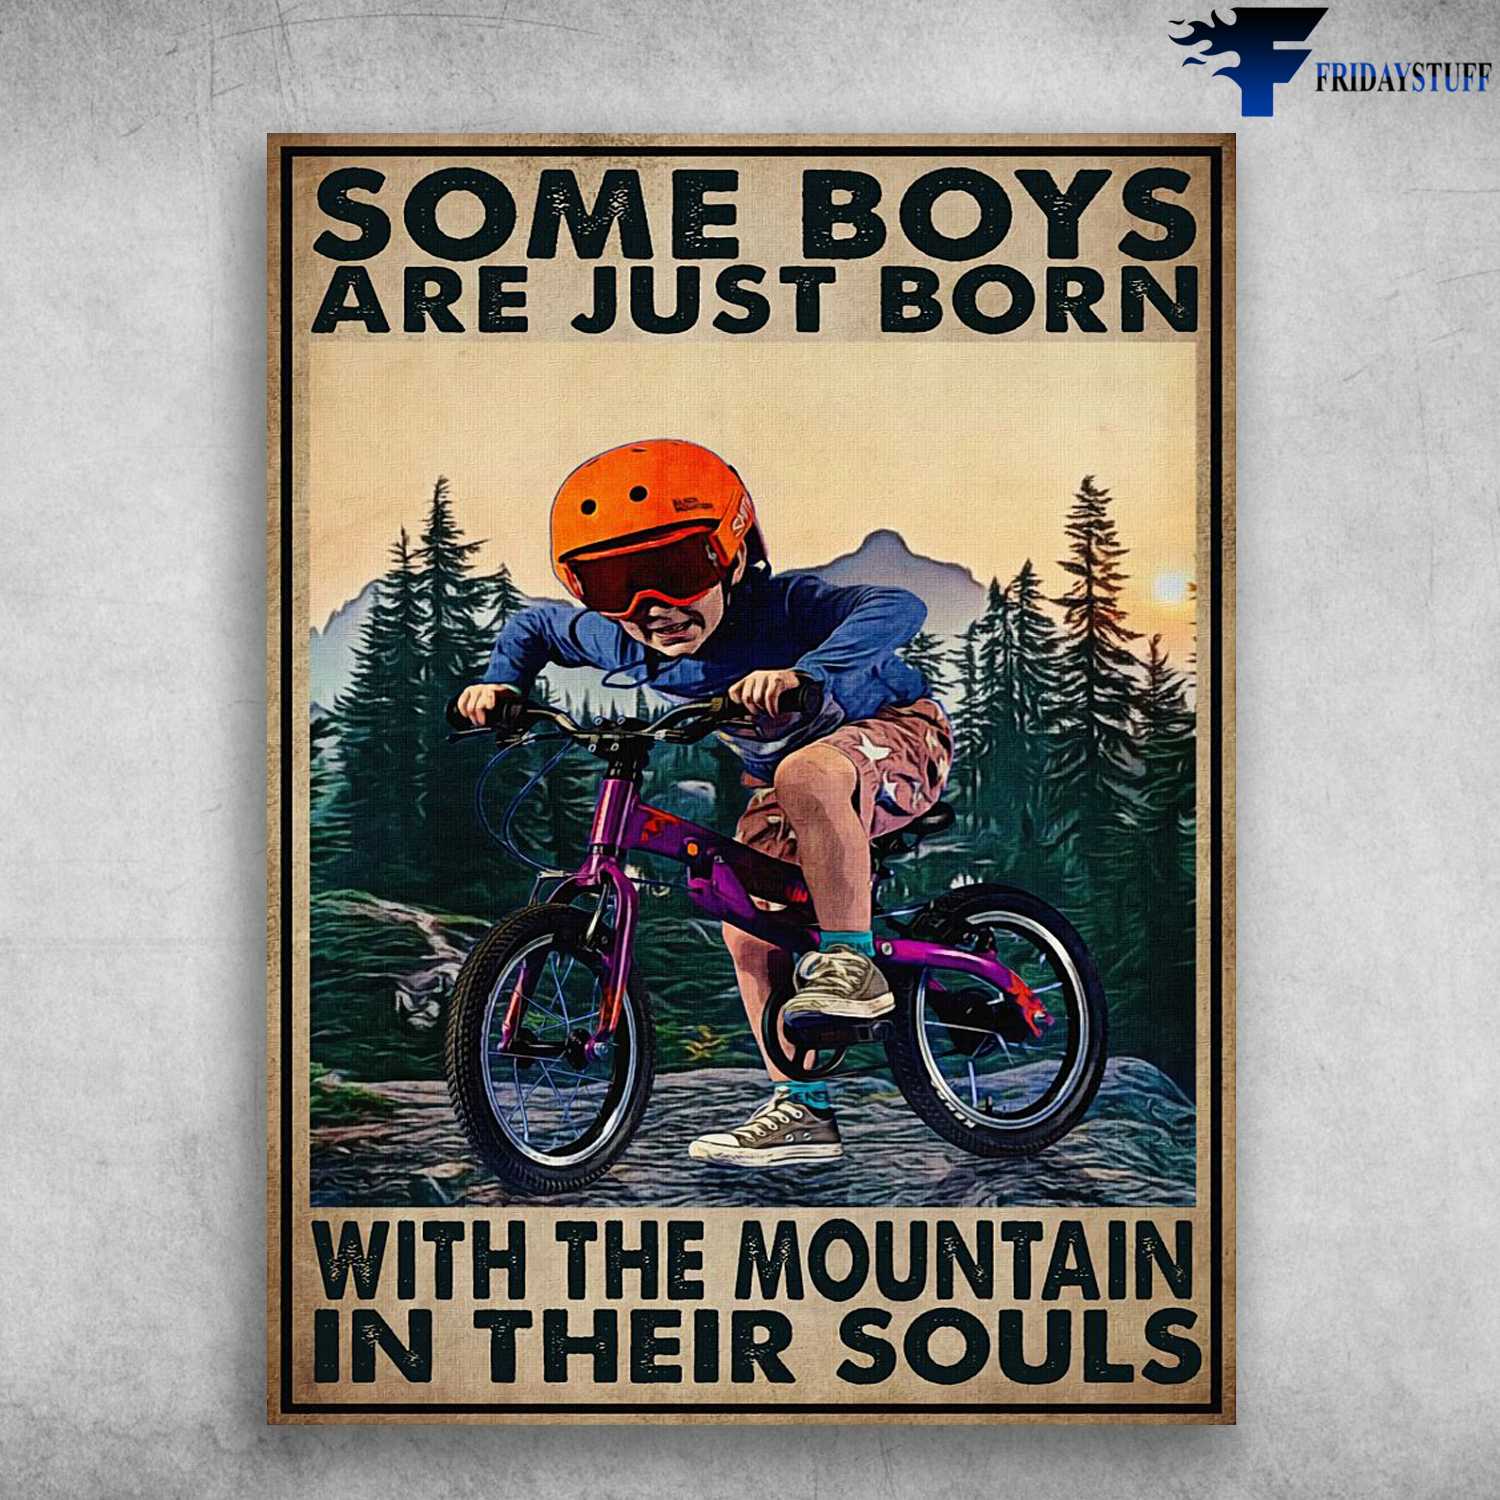 Mountain Biking, Boy Moutain Biking - Some Boys Are Just Born, With The Mountain In Their Souls